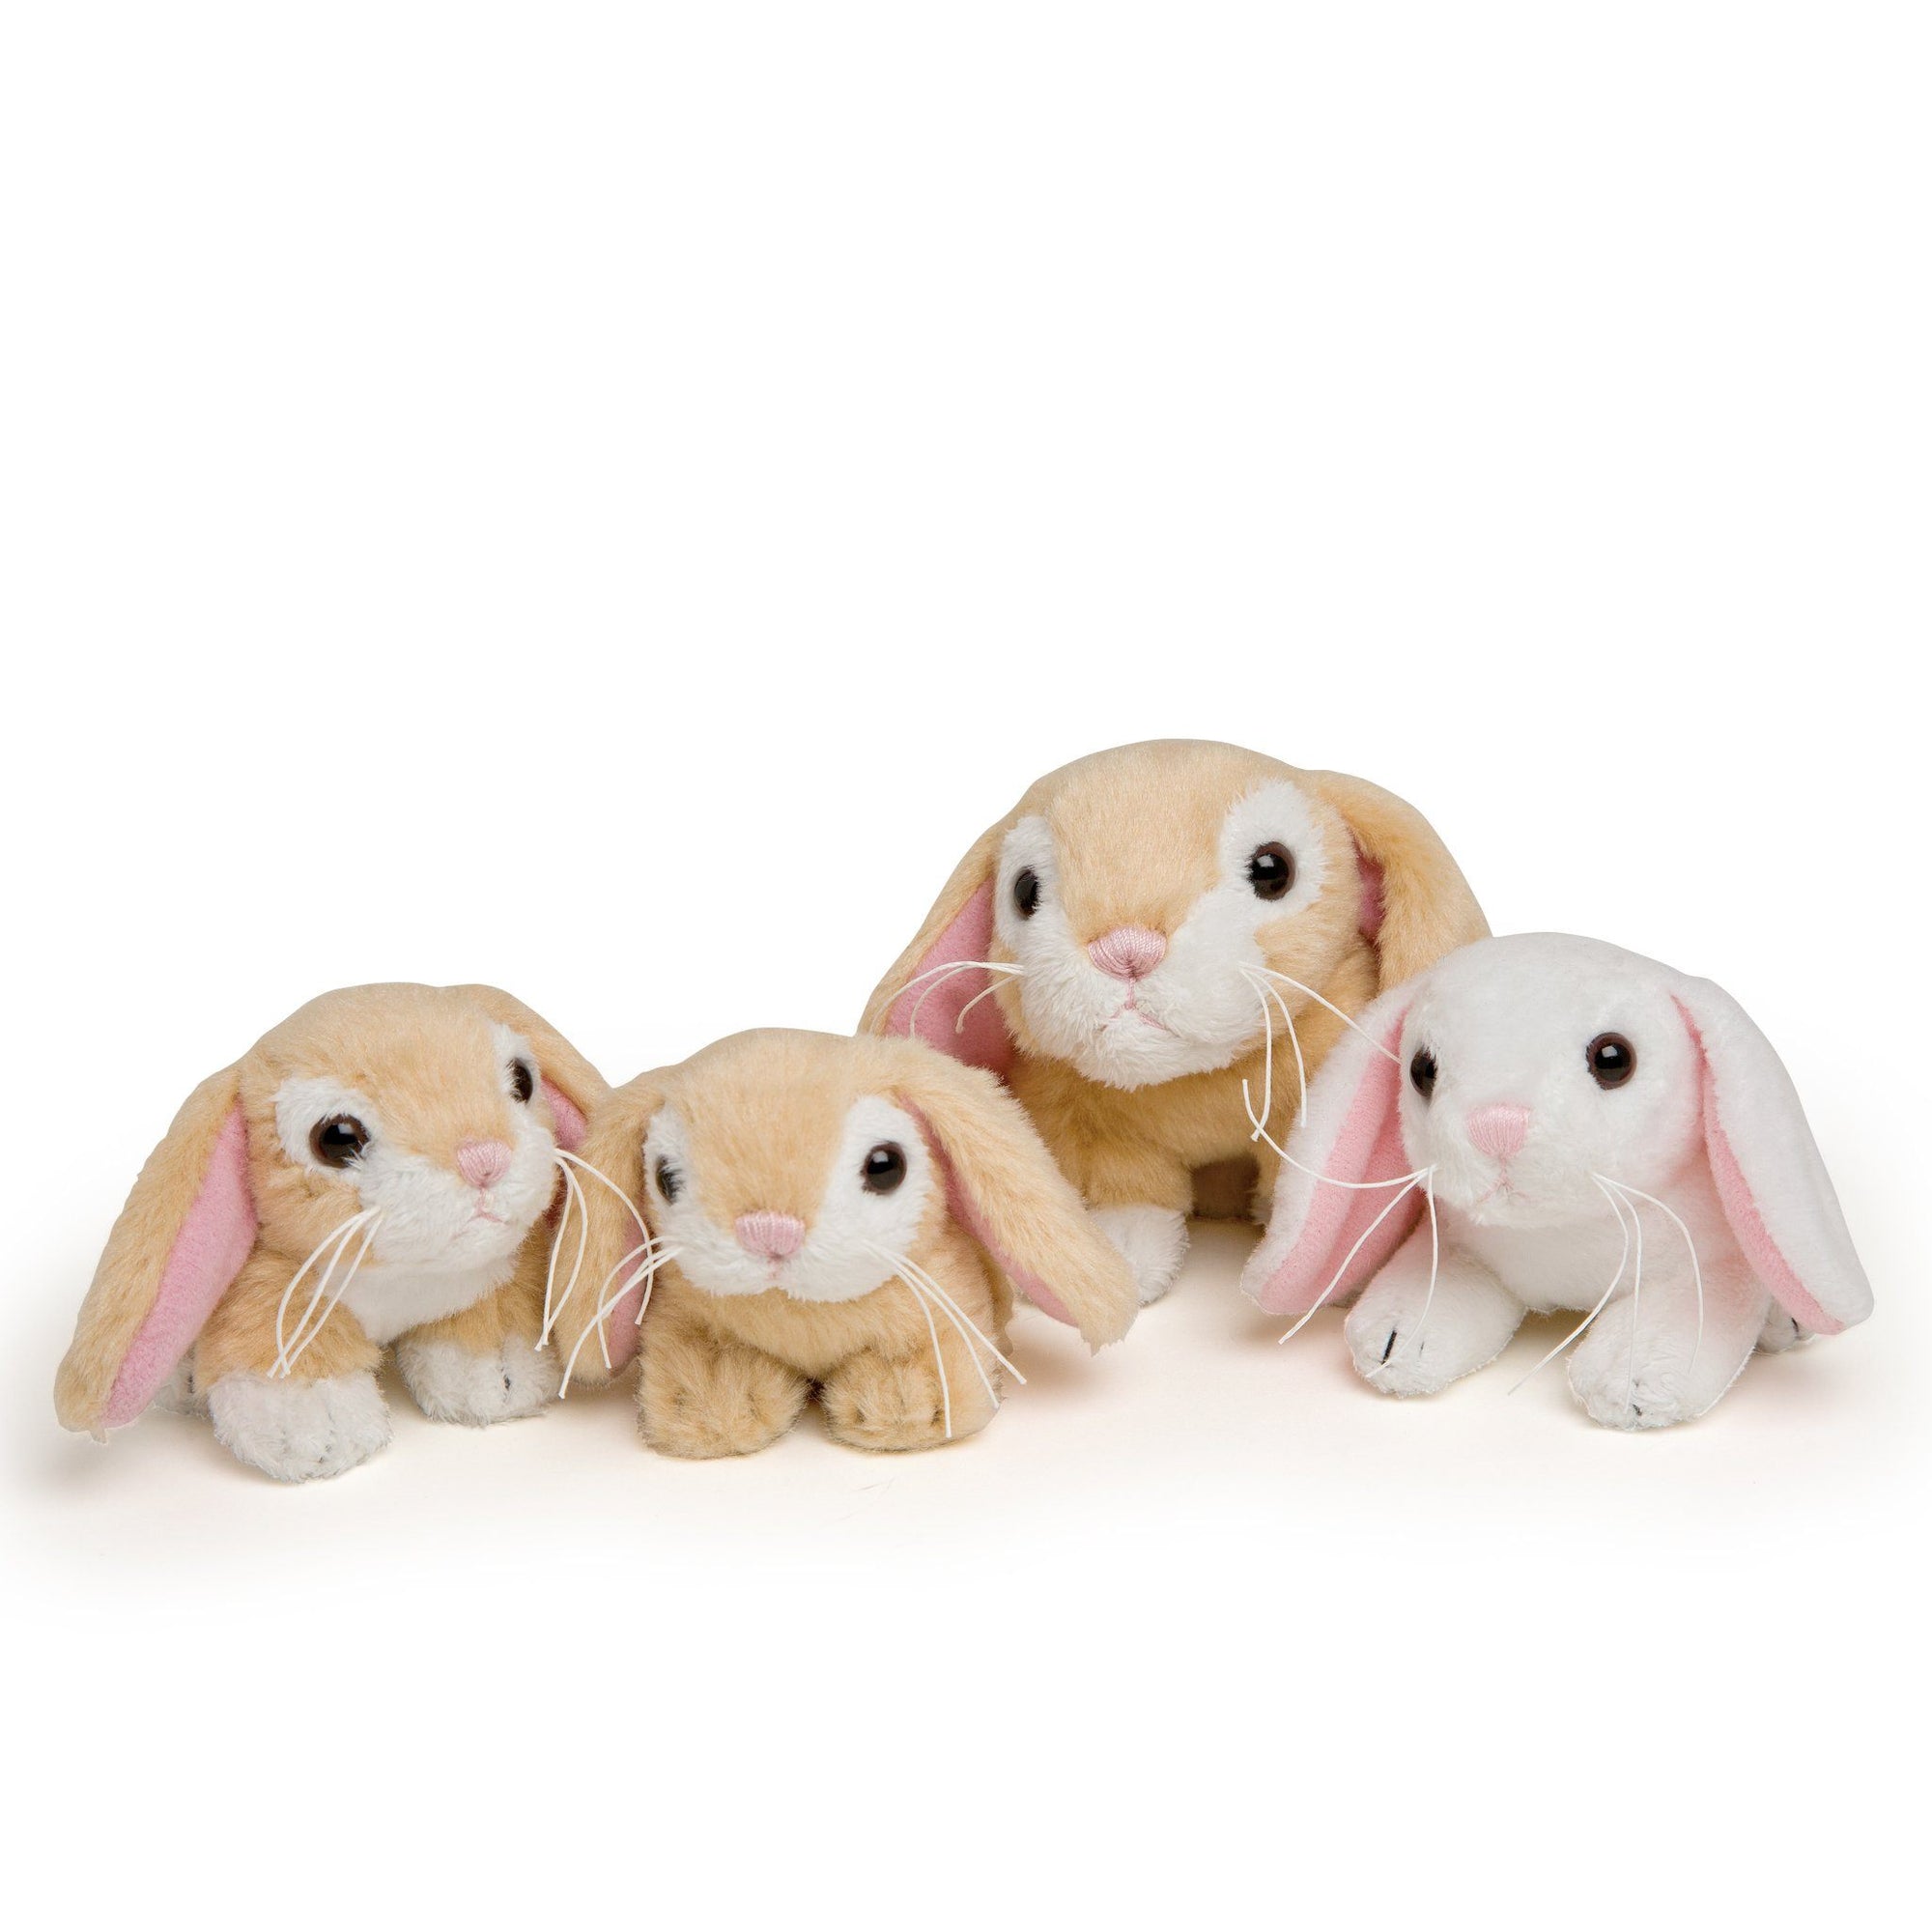 Hoppit and her bunnies is 1 mom lop-eared dwarf rabbit and her 3 baby bunnies. For all 18 inch dolls. 